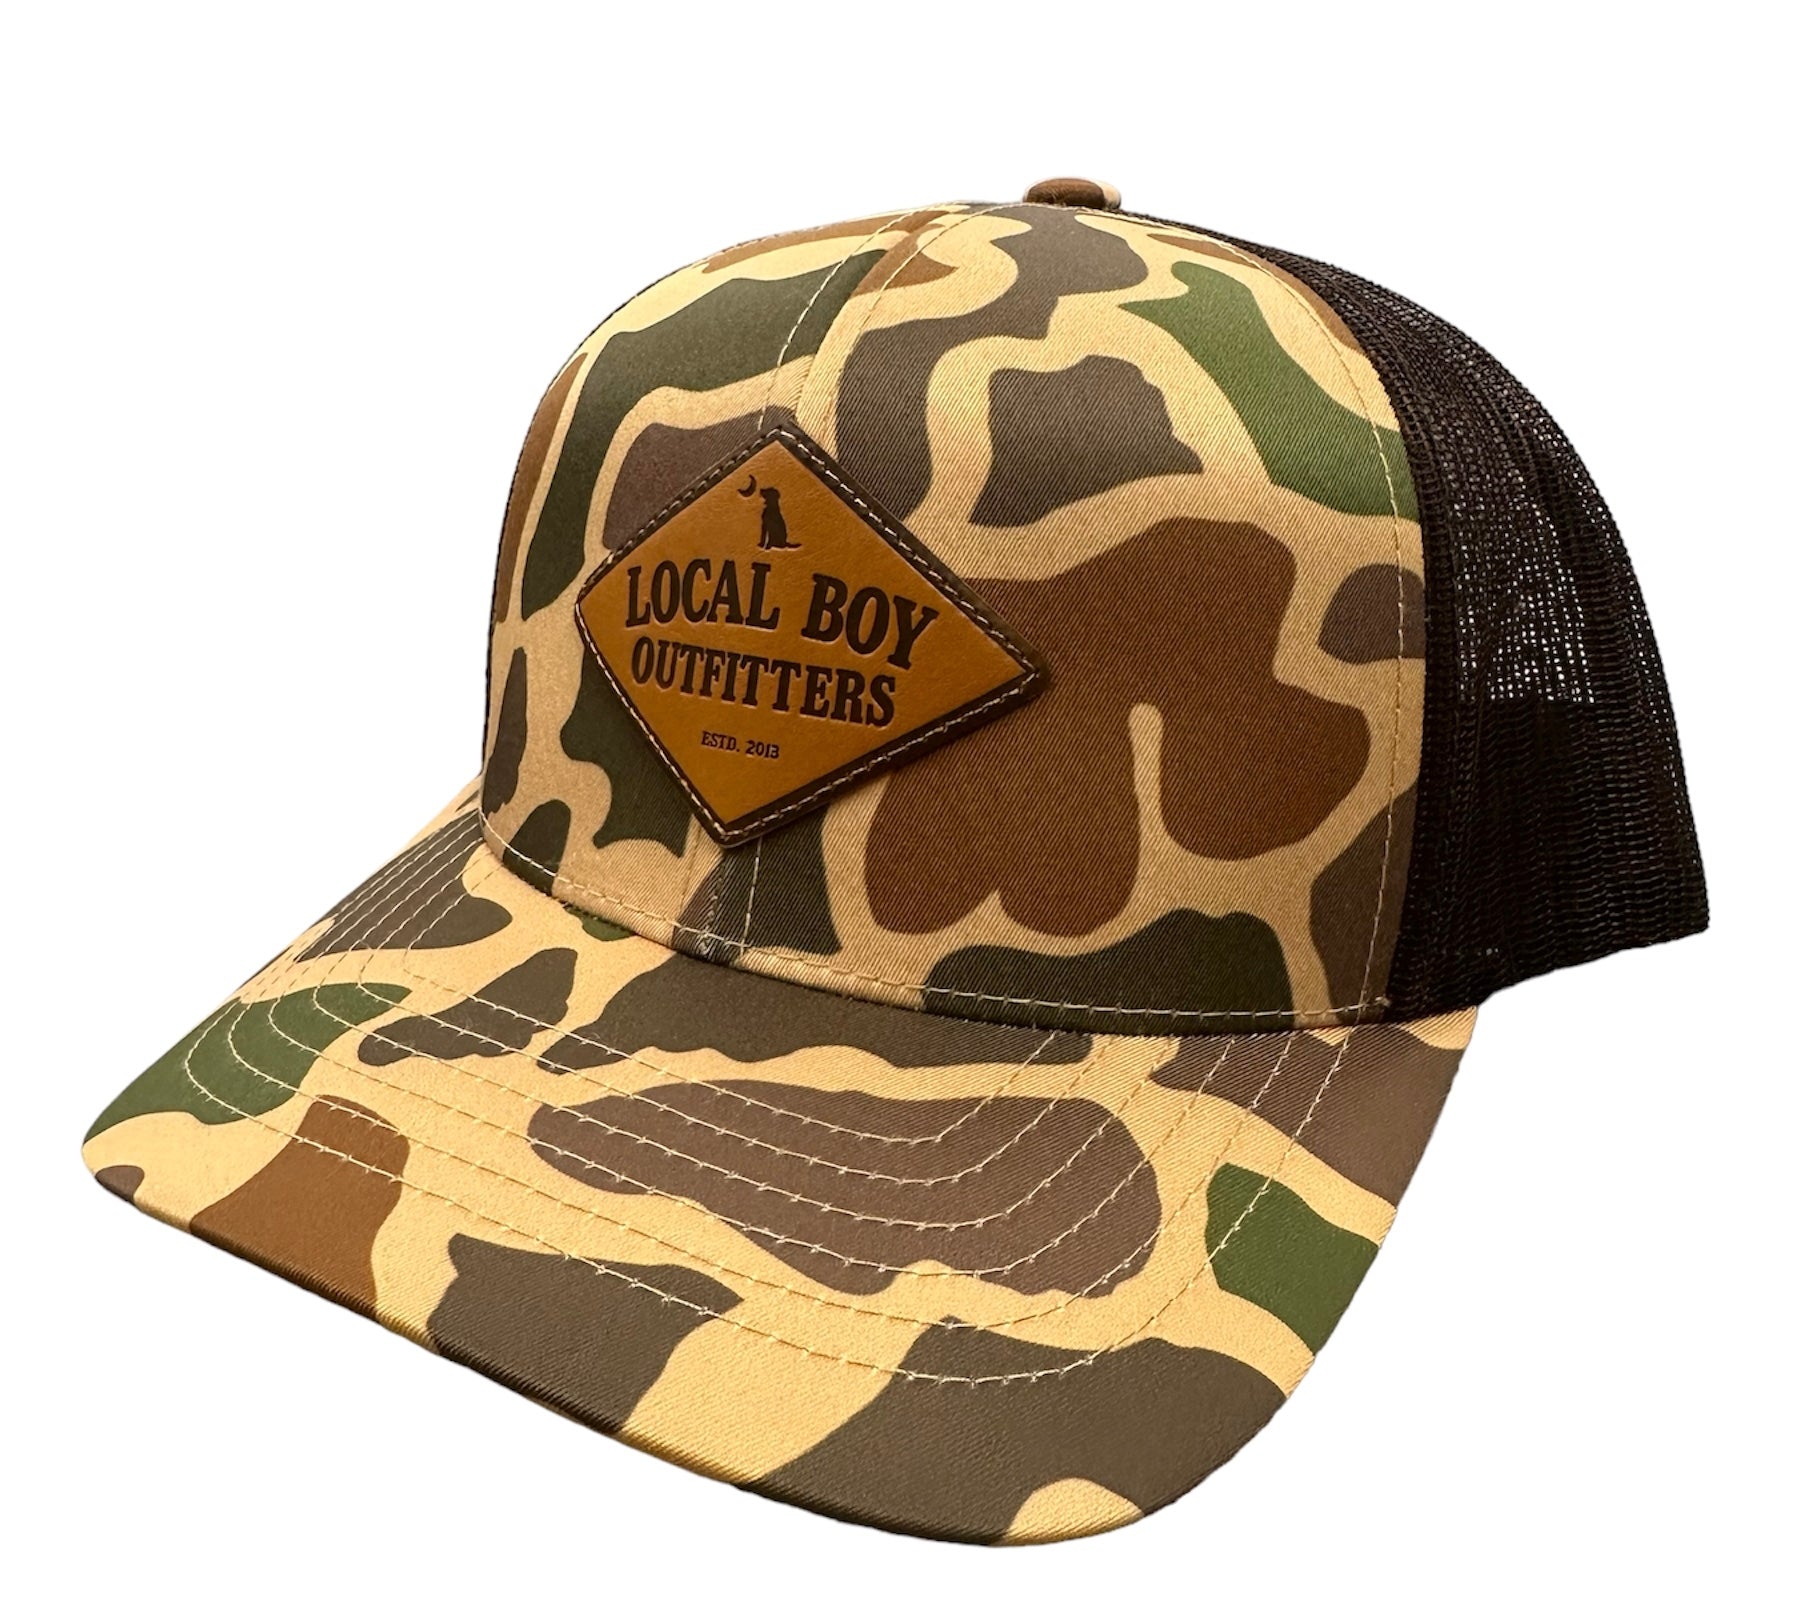 Local Boy Founders Patch - Old School Camo